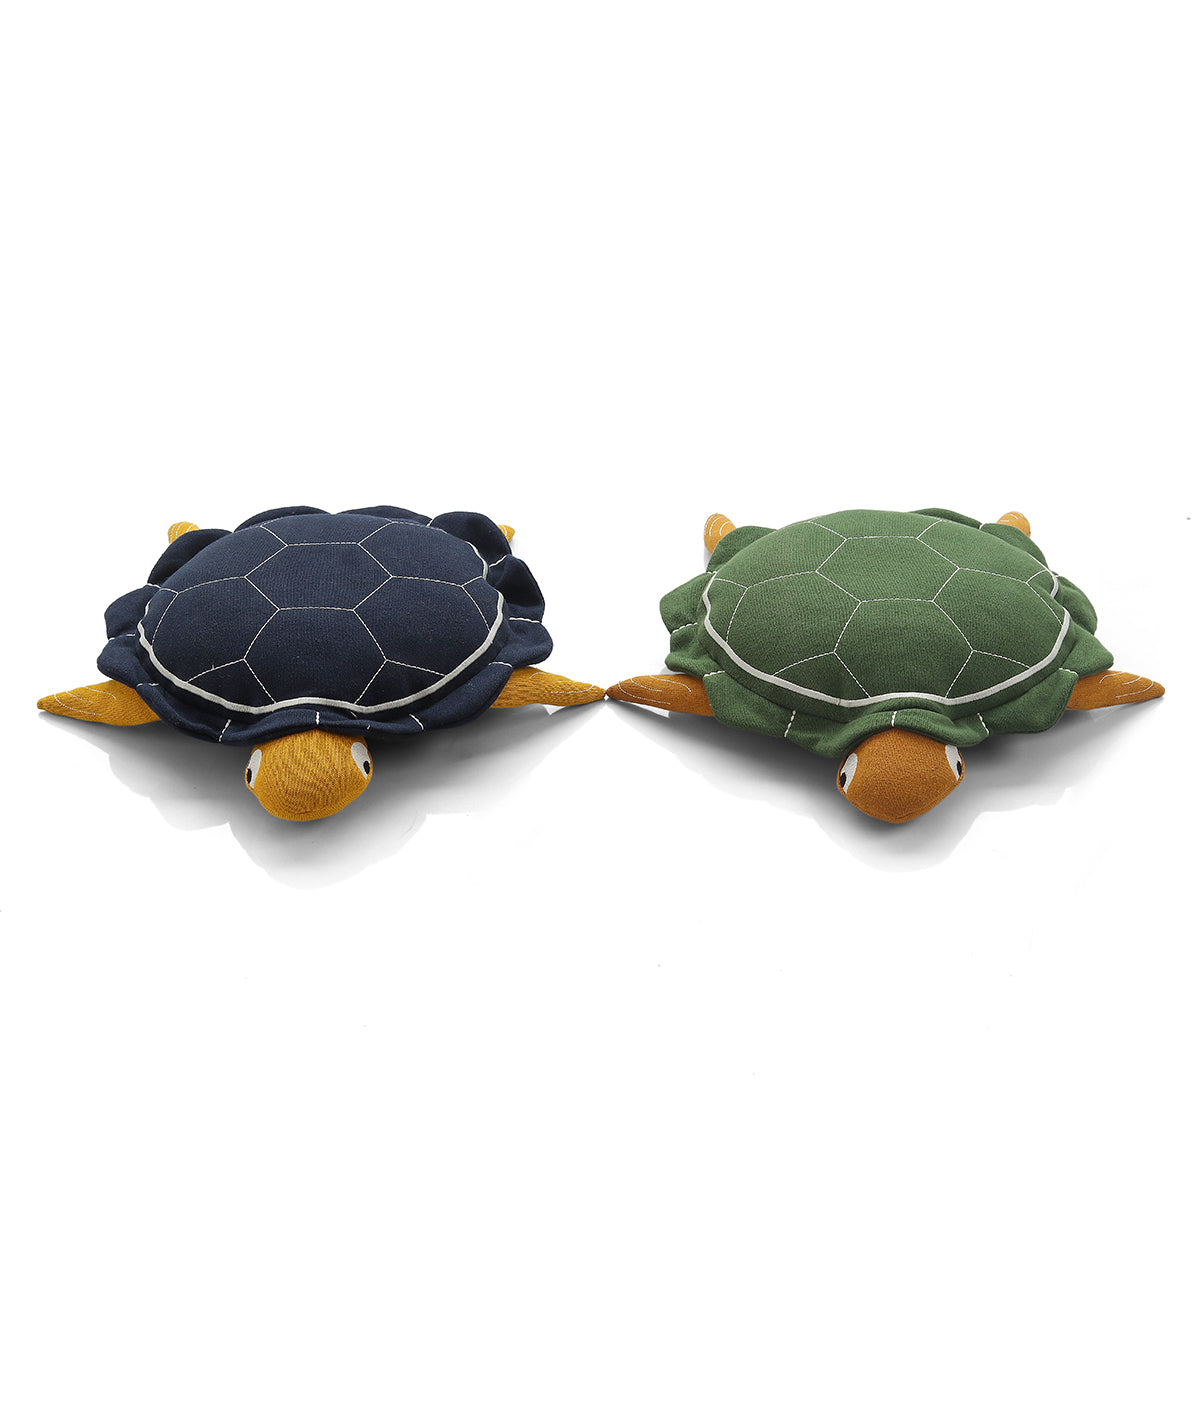 Mack The Tortoise - Cotton Knitted Stuffed Pillow for Babies (Navy Blue)